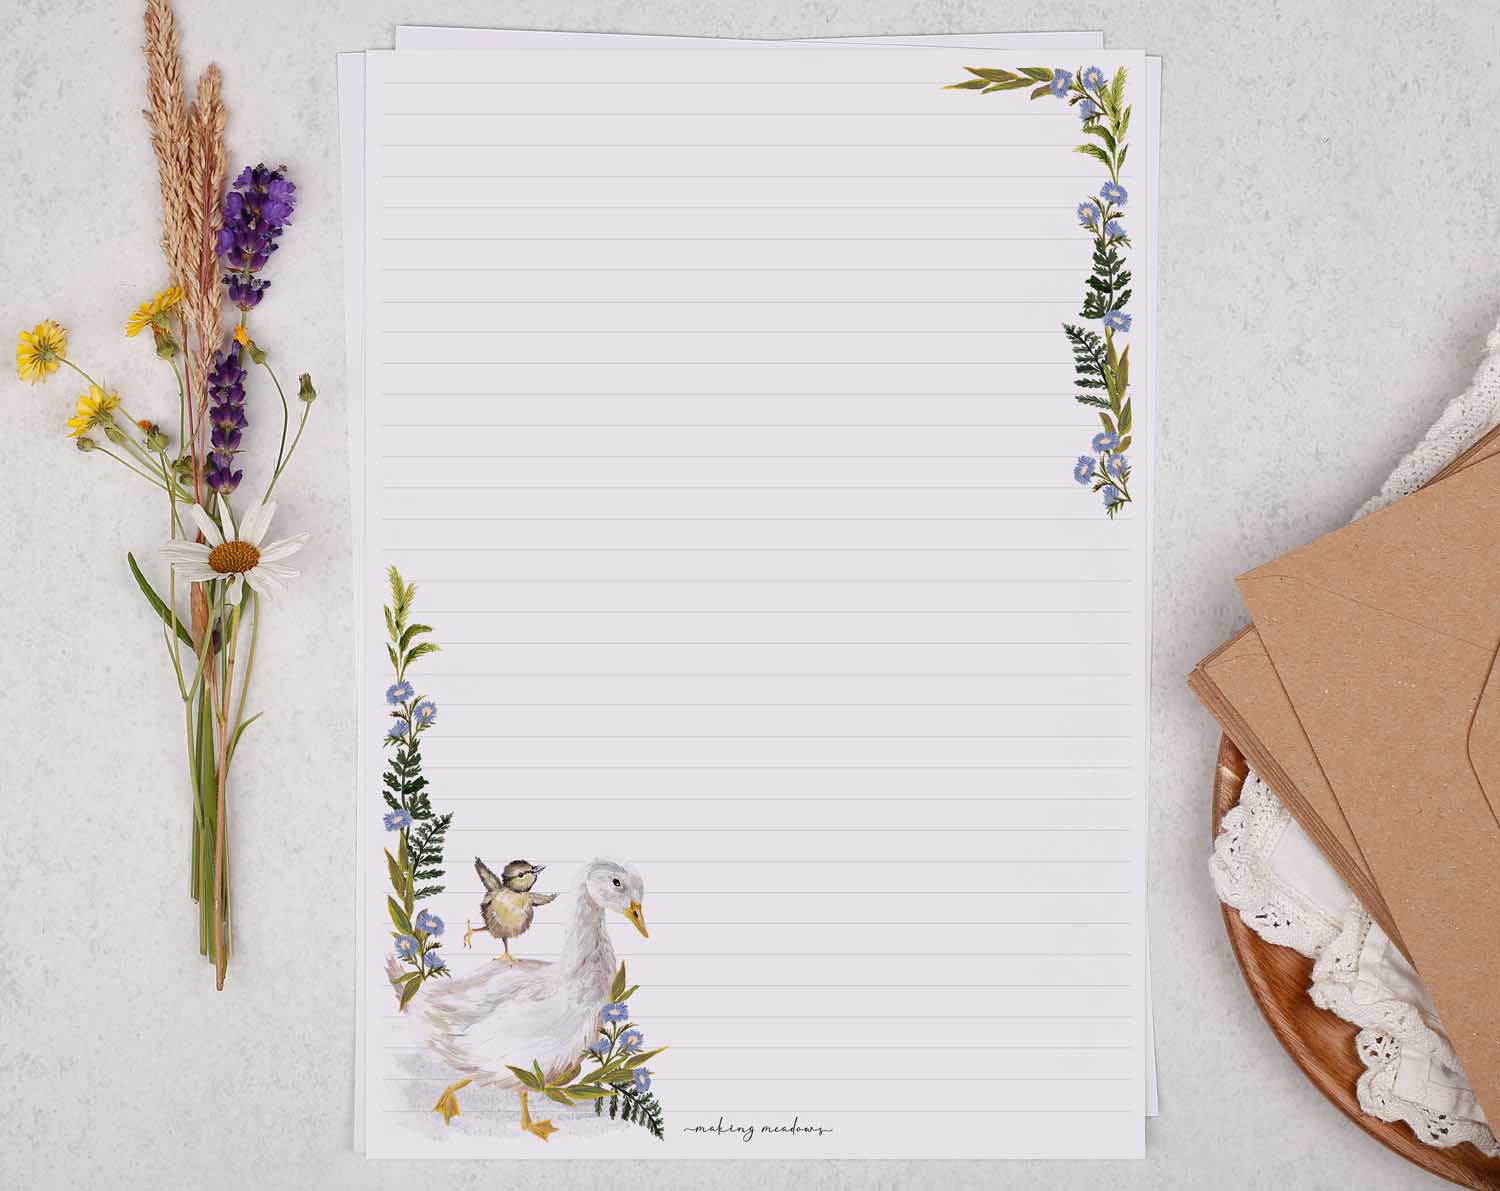 A4 letter writing paper sheets with a cute farmyard goose and baby duck. The birds are complimented by a delicate blue floral watercolour border cascading around the letter paper edge.